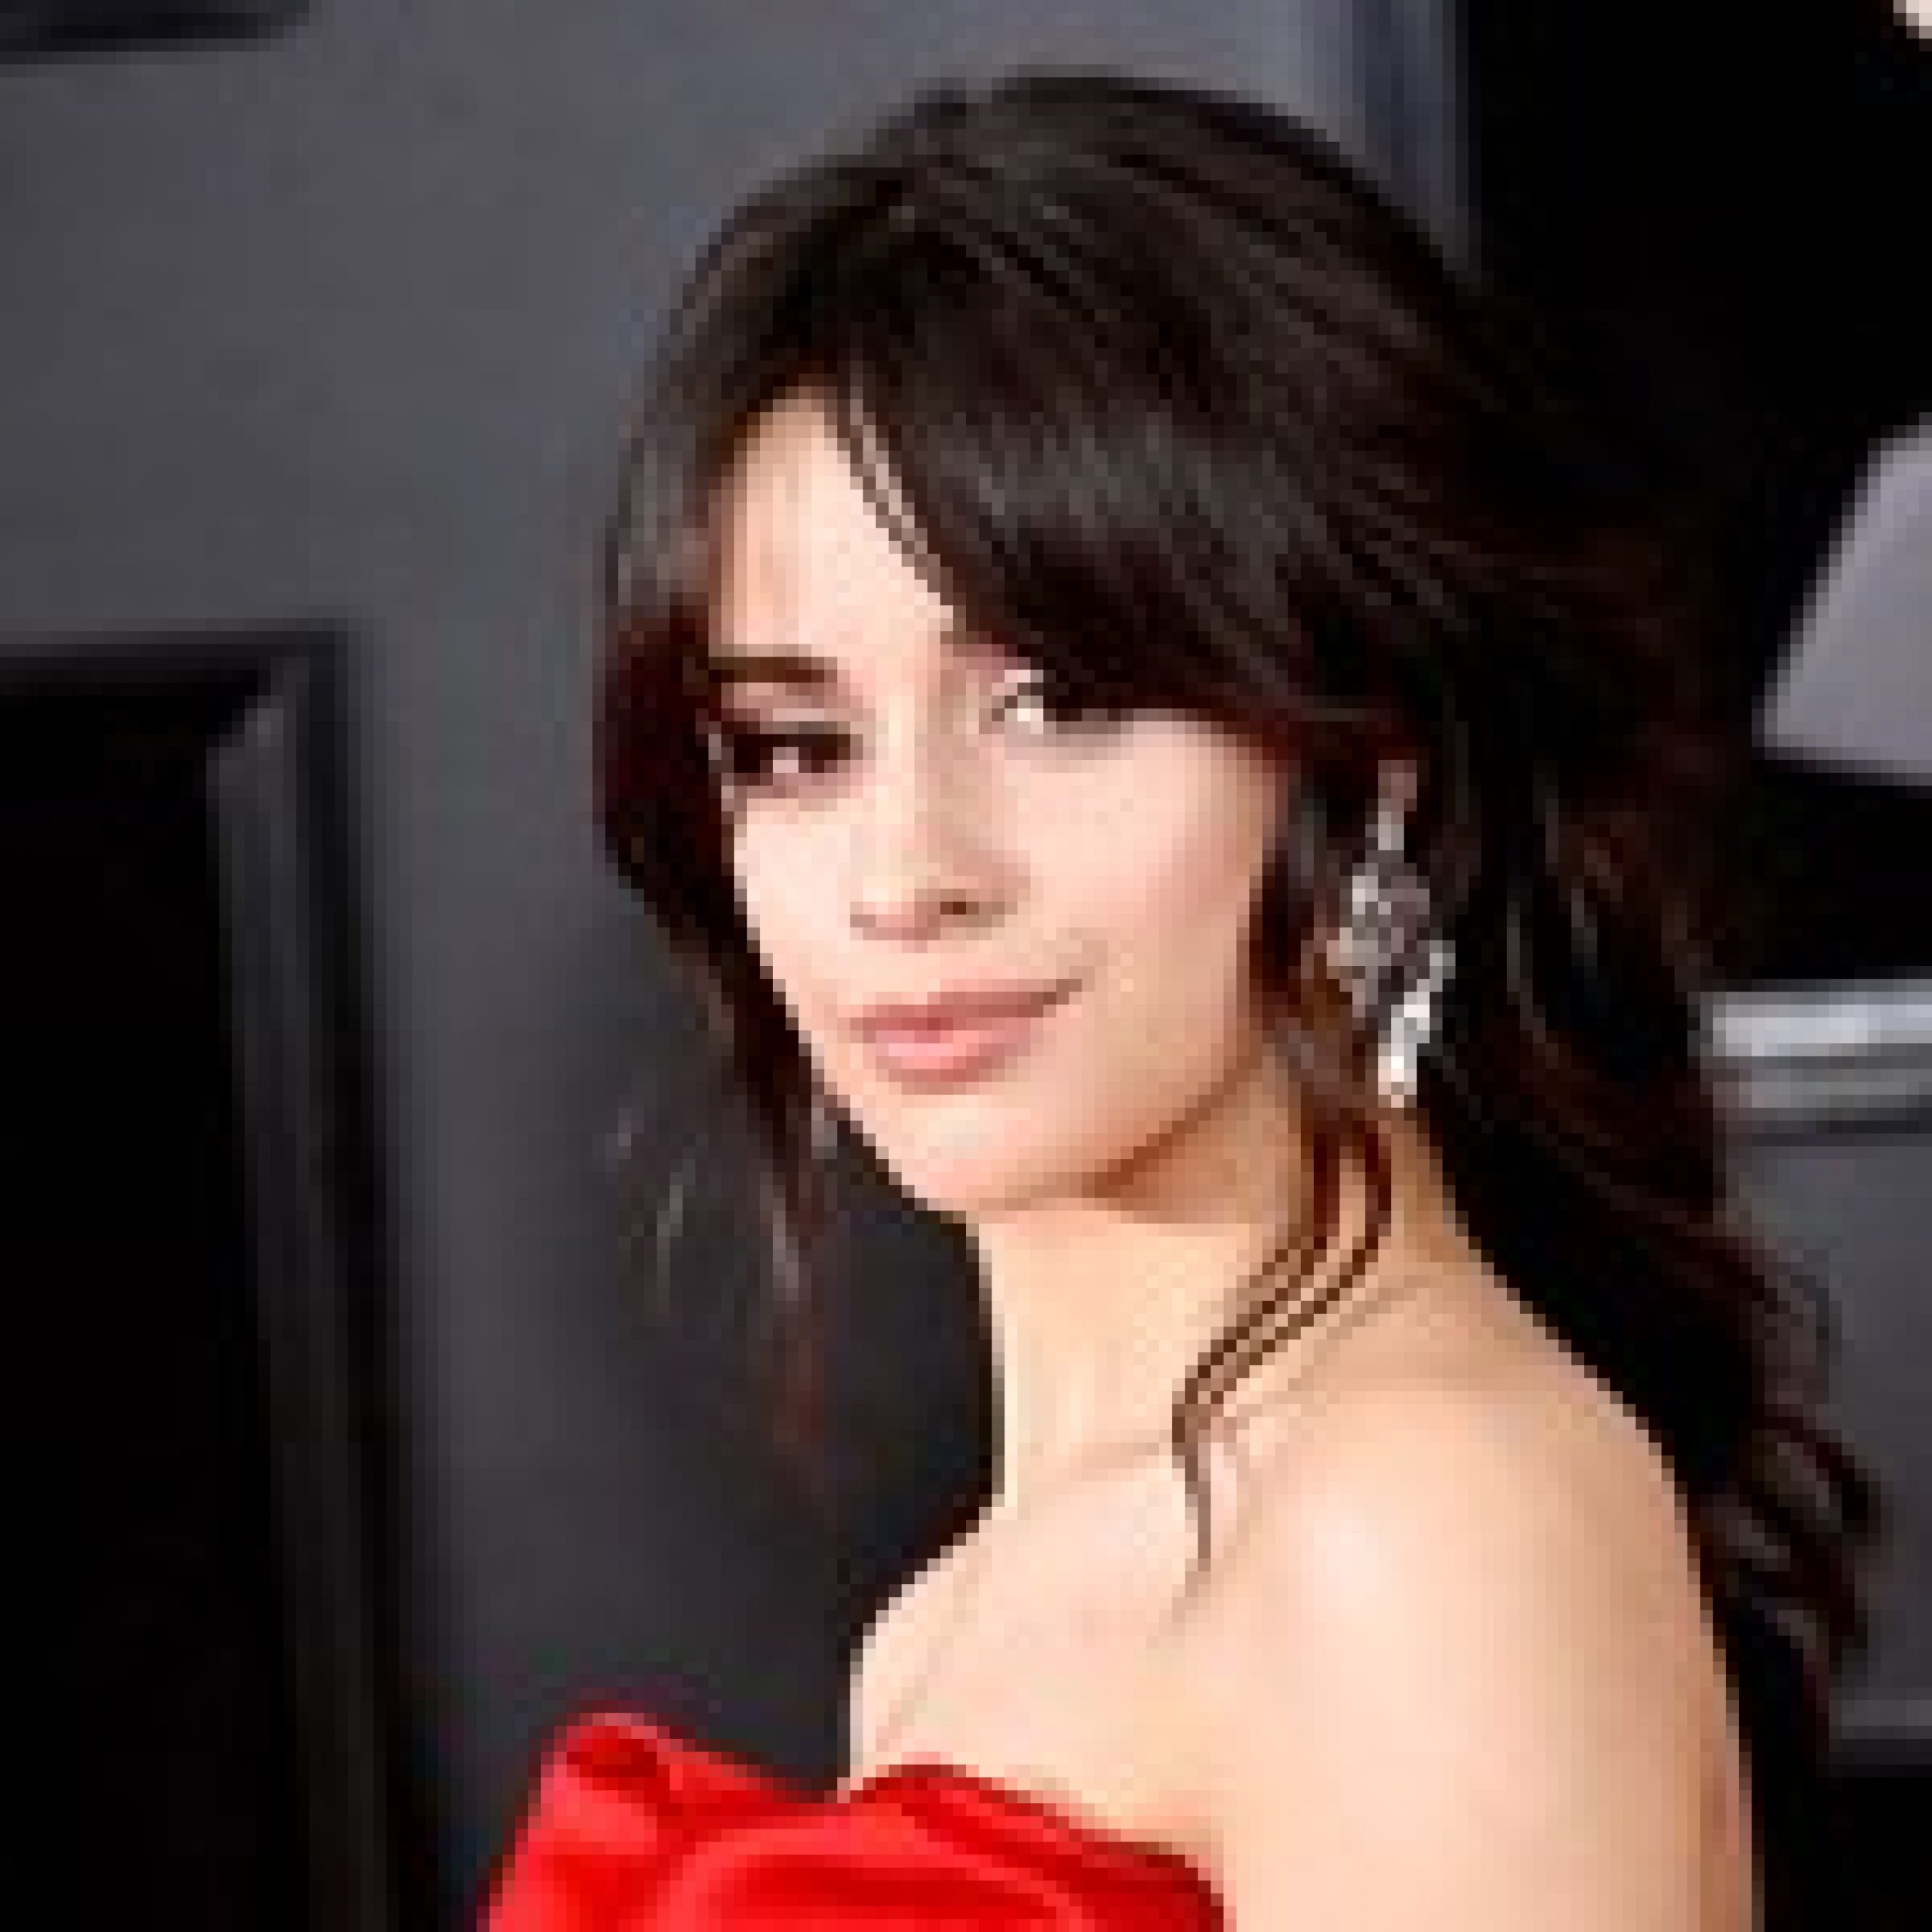 Camila Cabello Shows Off Bare Stomach While Sharing Inspiring Message About Body Positivity